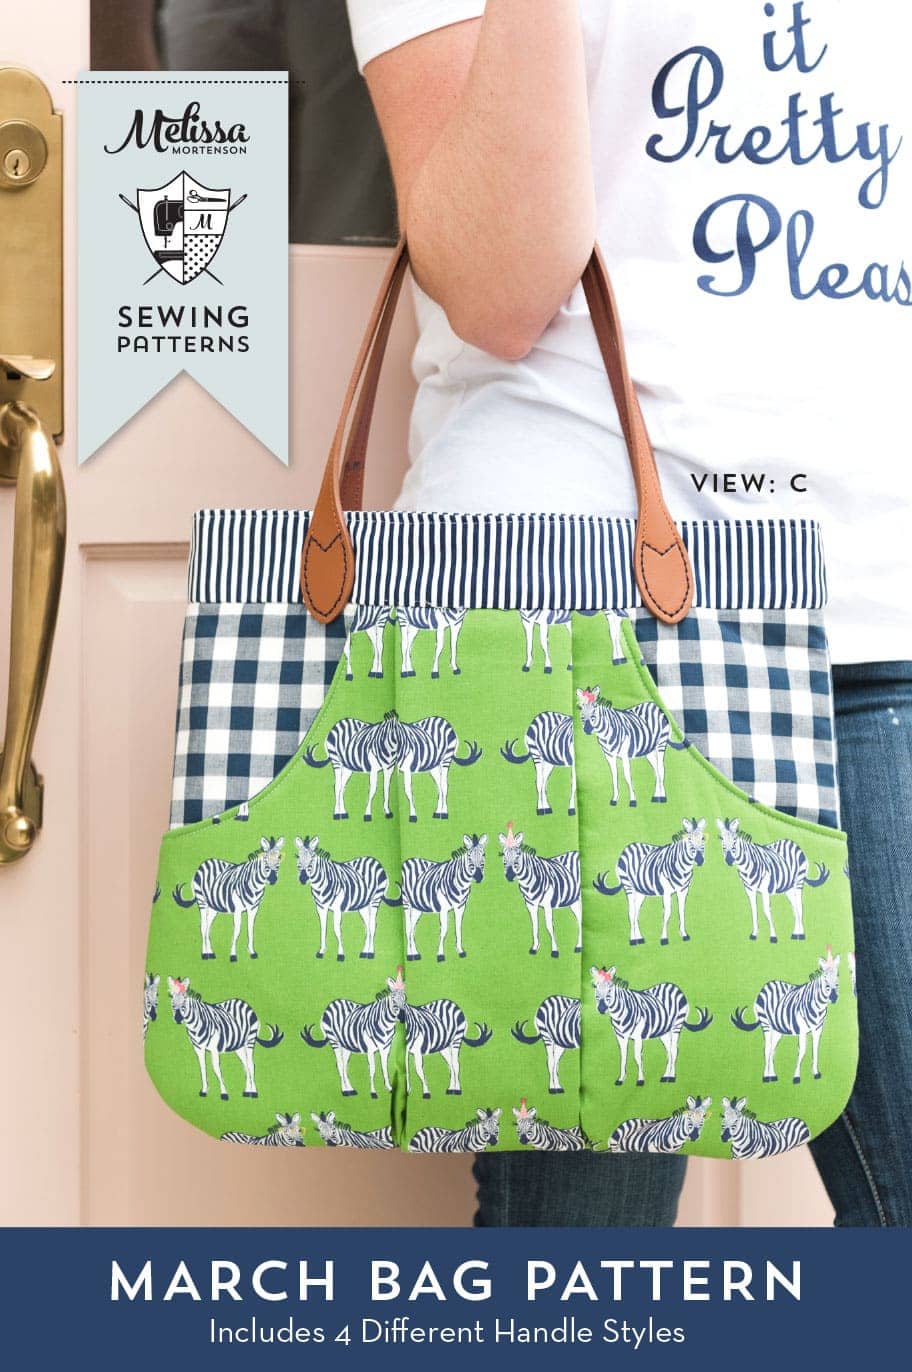 The March Bag Sewing Pattern